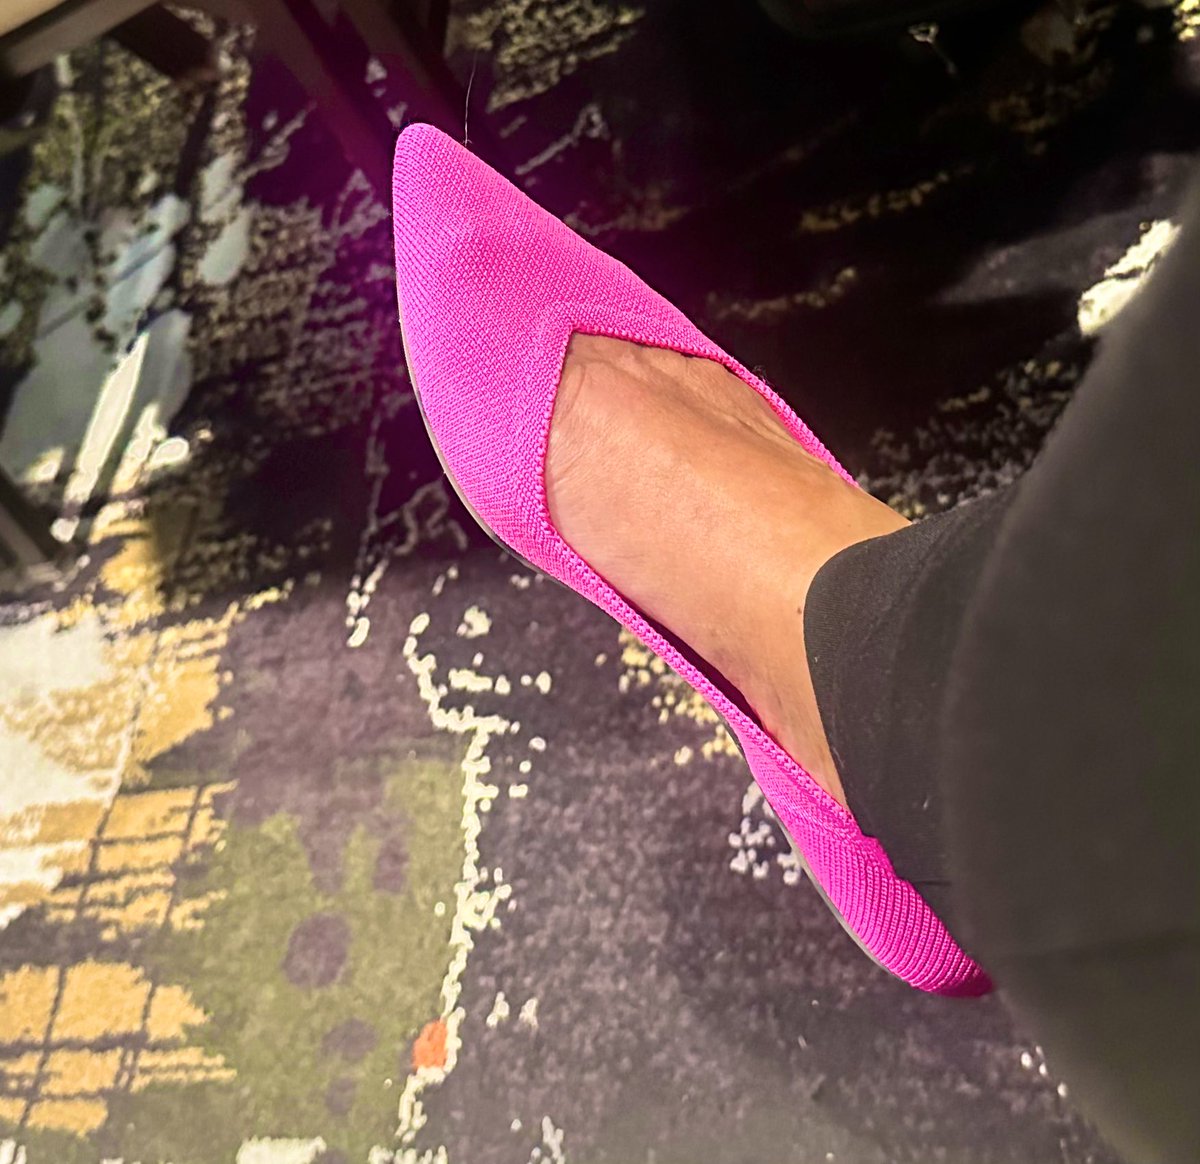 Since the boots were such a hit yesterday, I have to share some @rothys love today. I am out of Vegas practice. Comfy flats today, ftw! 
Obligatory ugly conference center carpet included. Ya welcome.